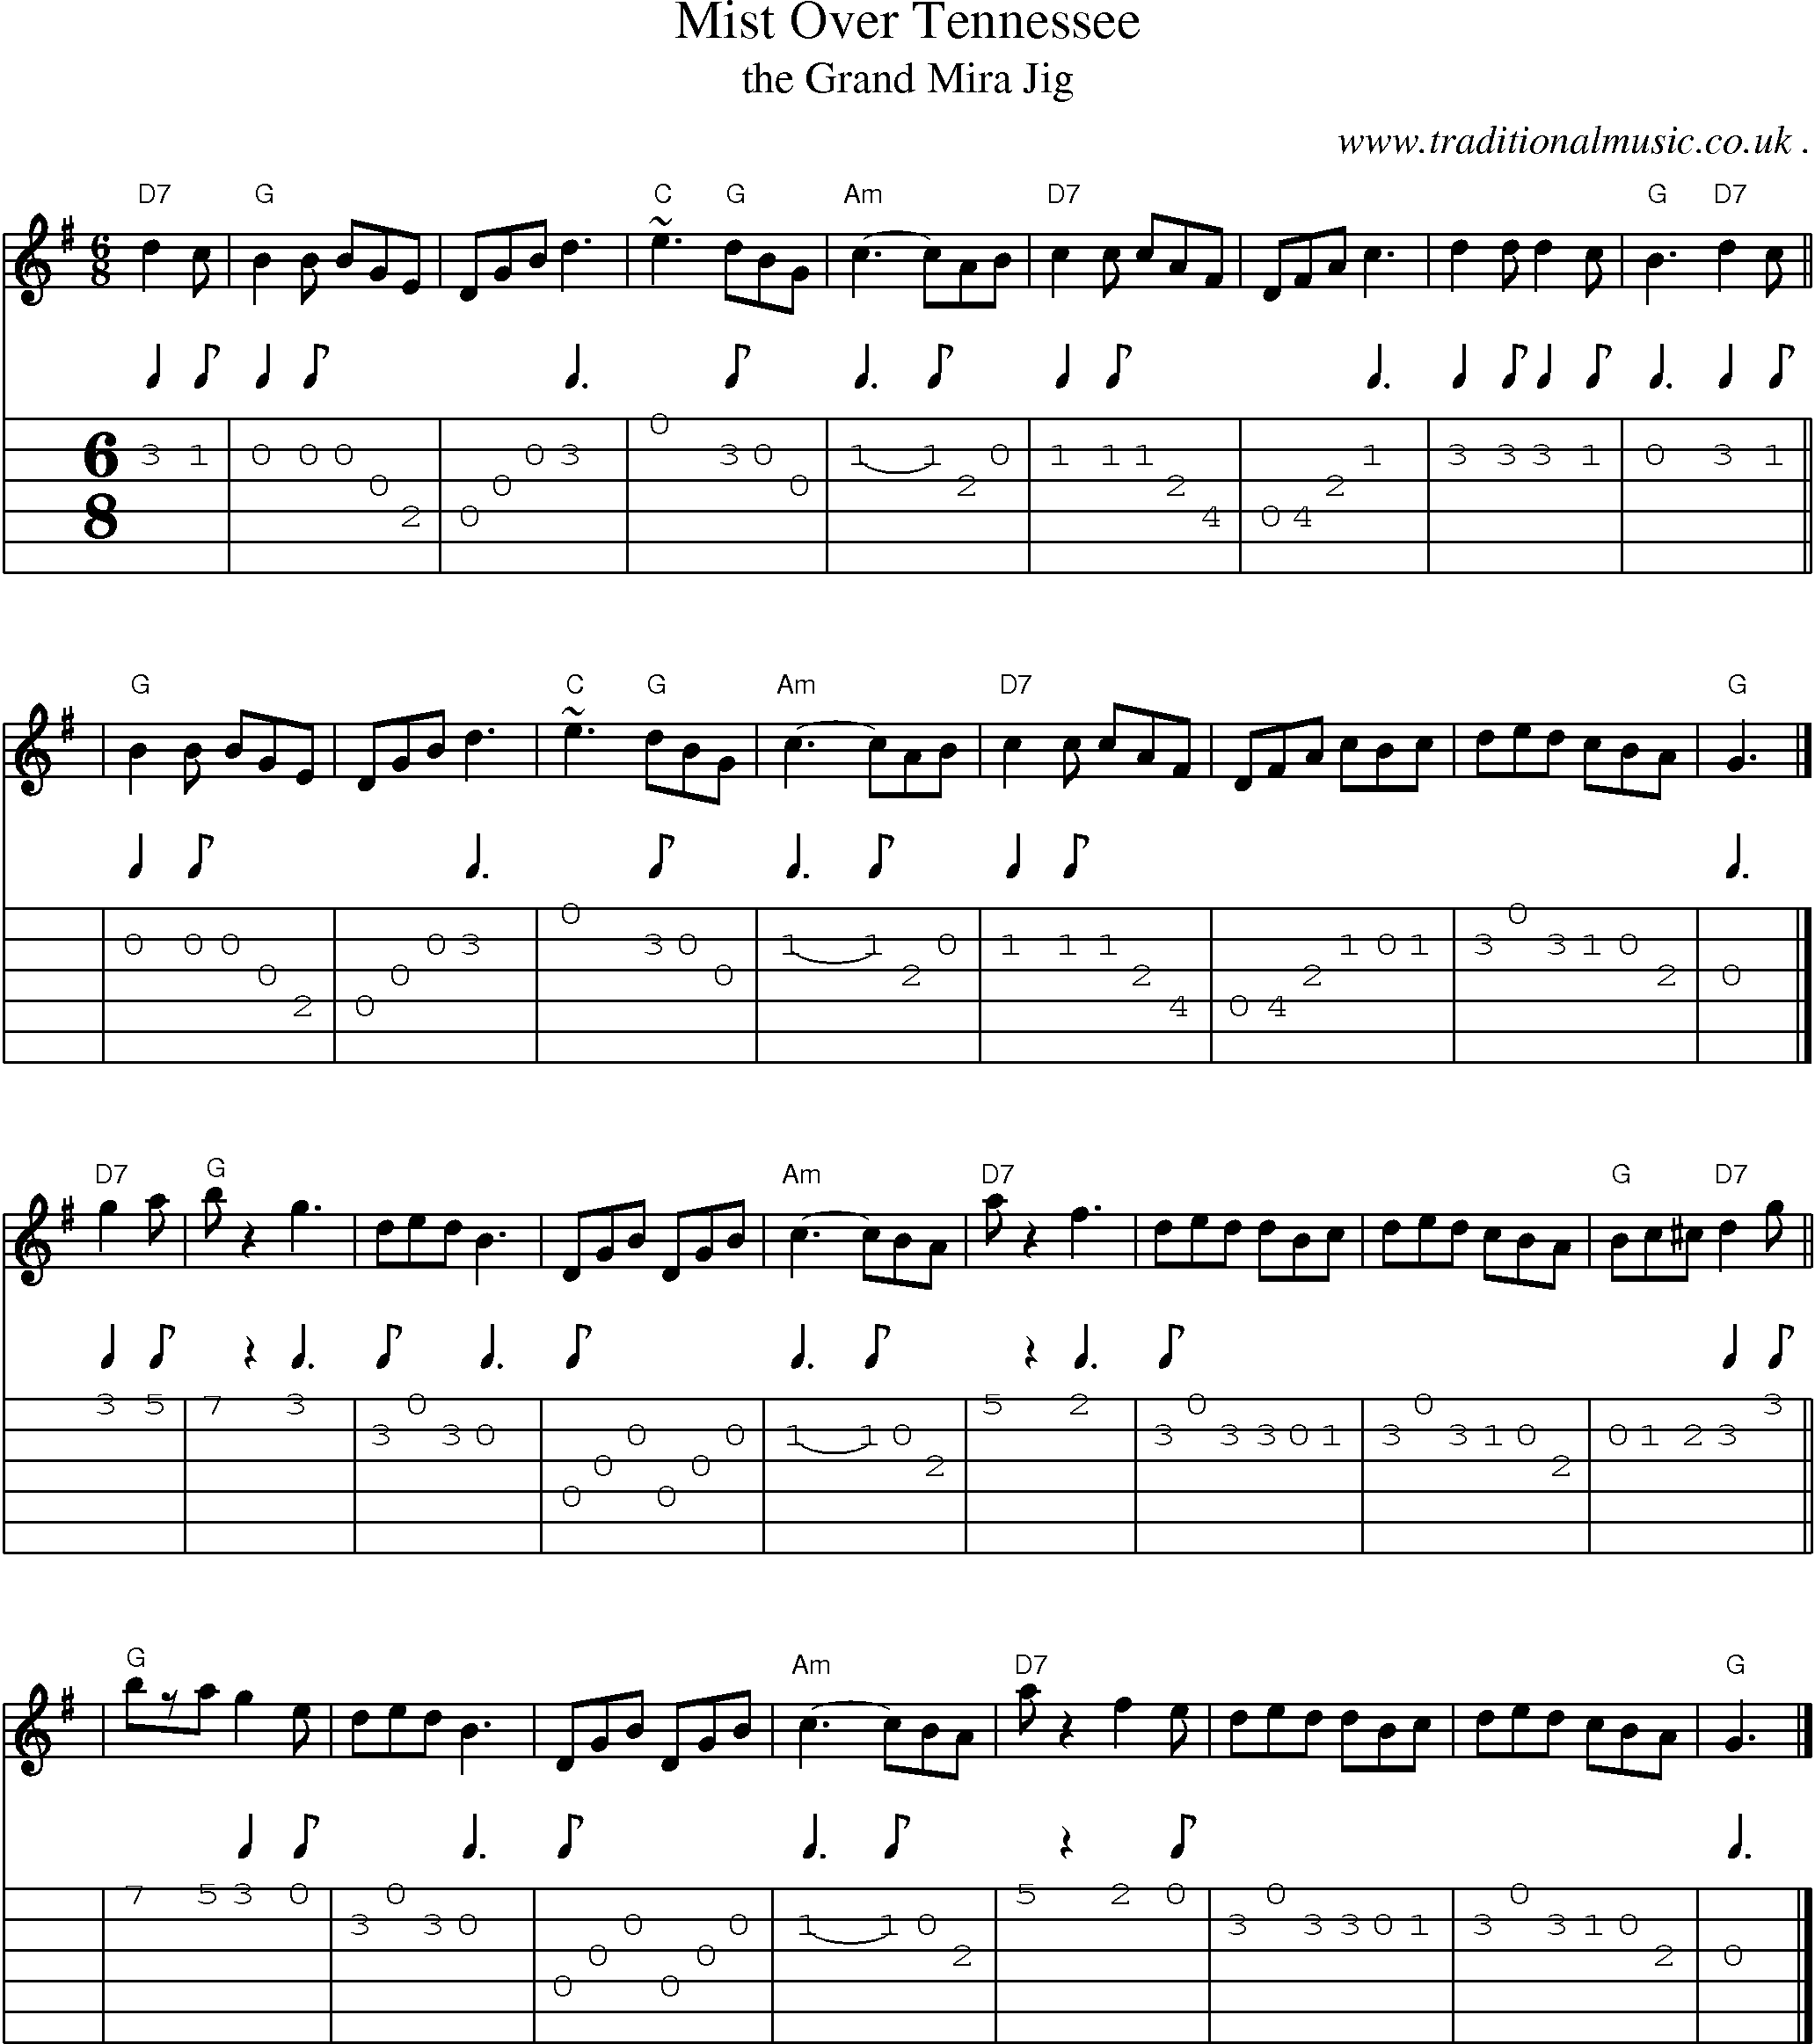 Sheet-music  score, Chords and Guitar Tabs for Mist Over Tennessee